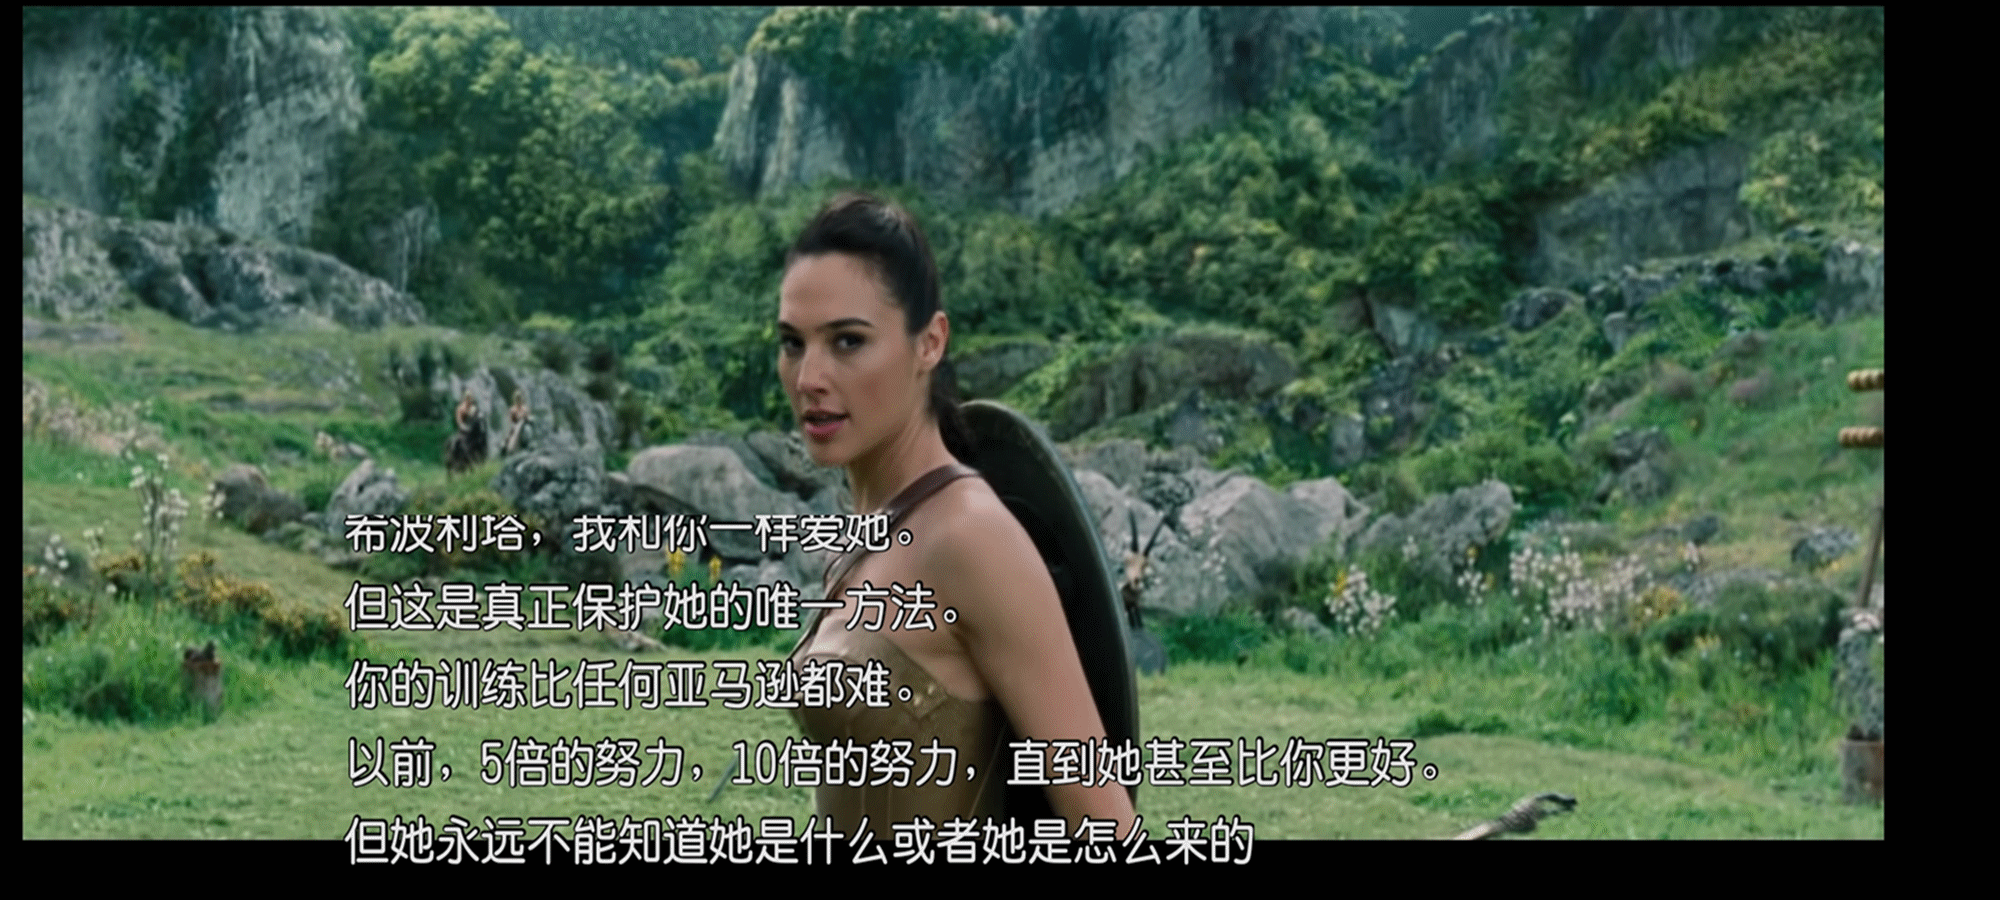 Screenshot_2021-08-13-16-14-32-623_com.android.browser_副本.gif